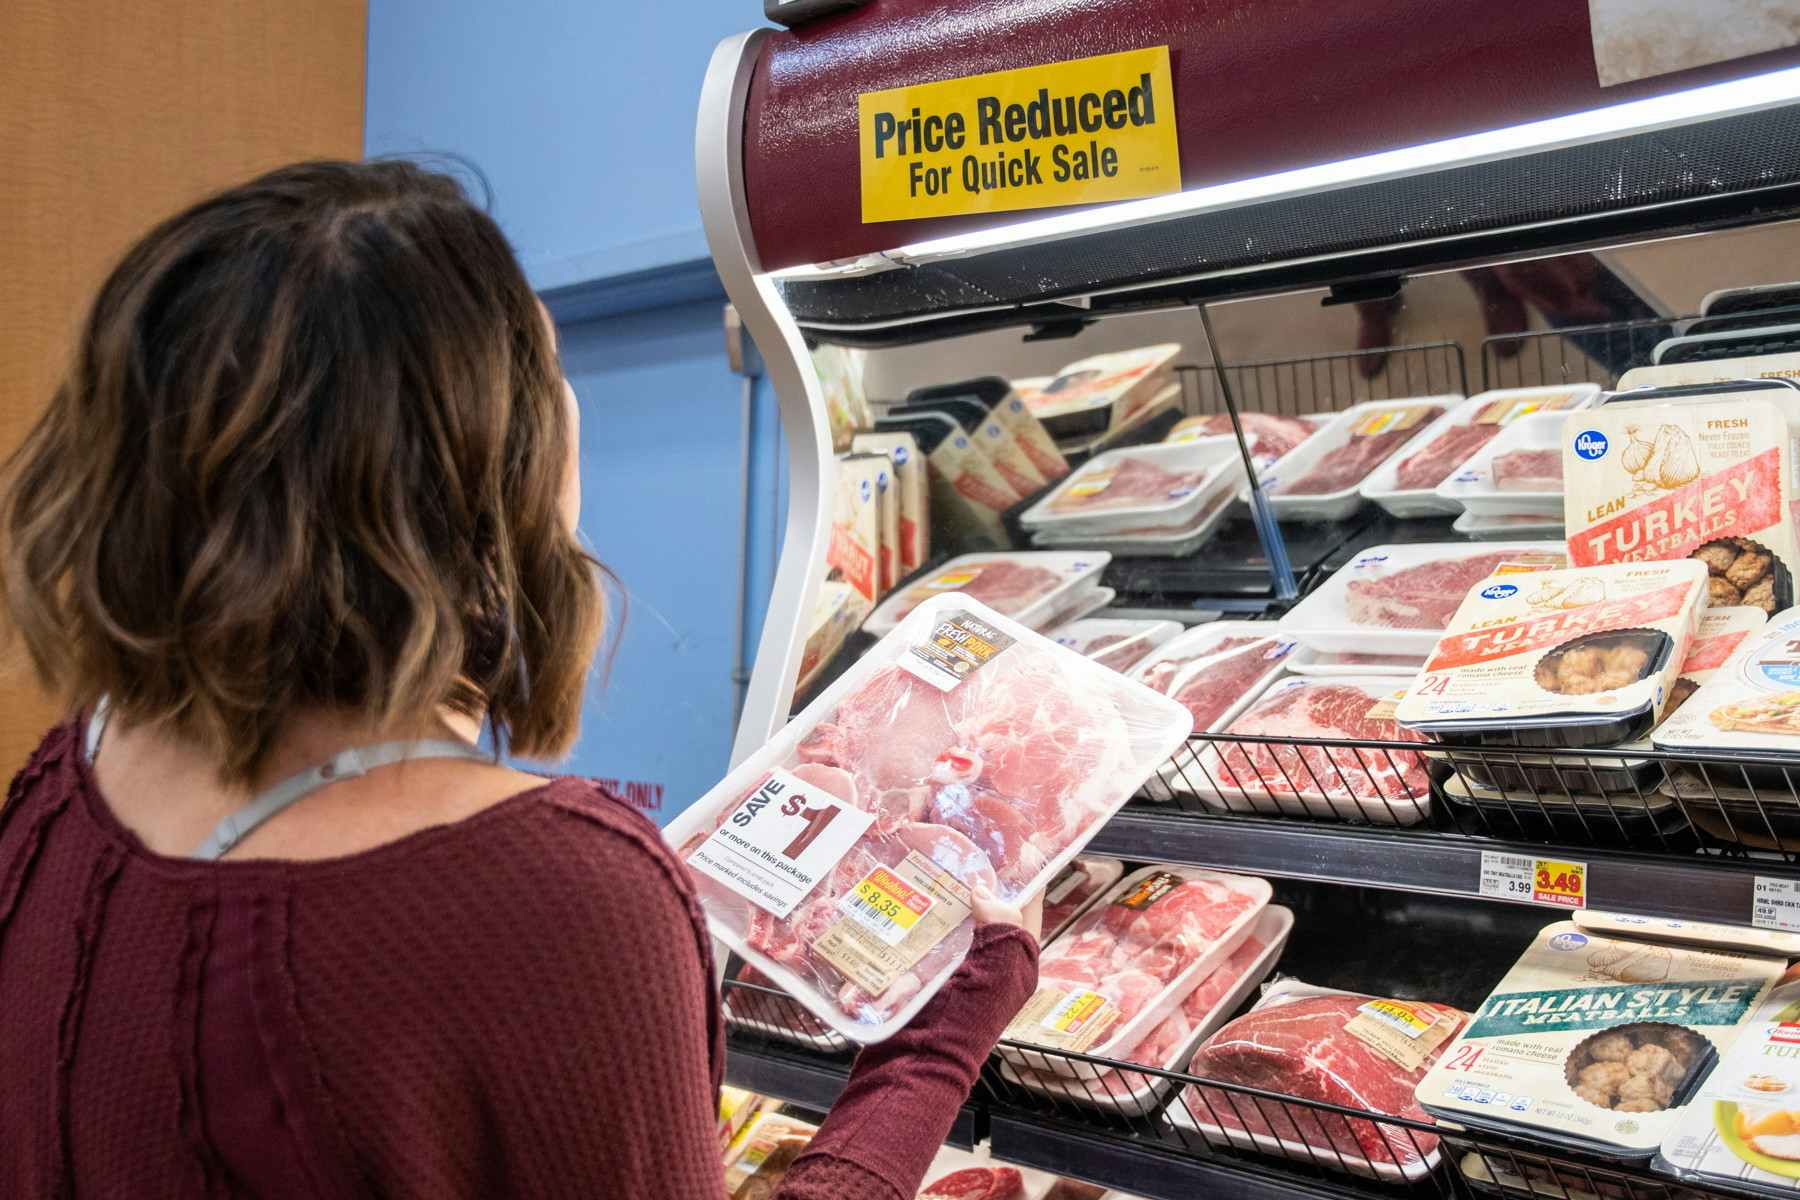 A person looking at a clearance section in a store's meat department.